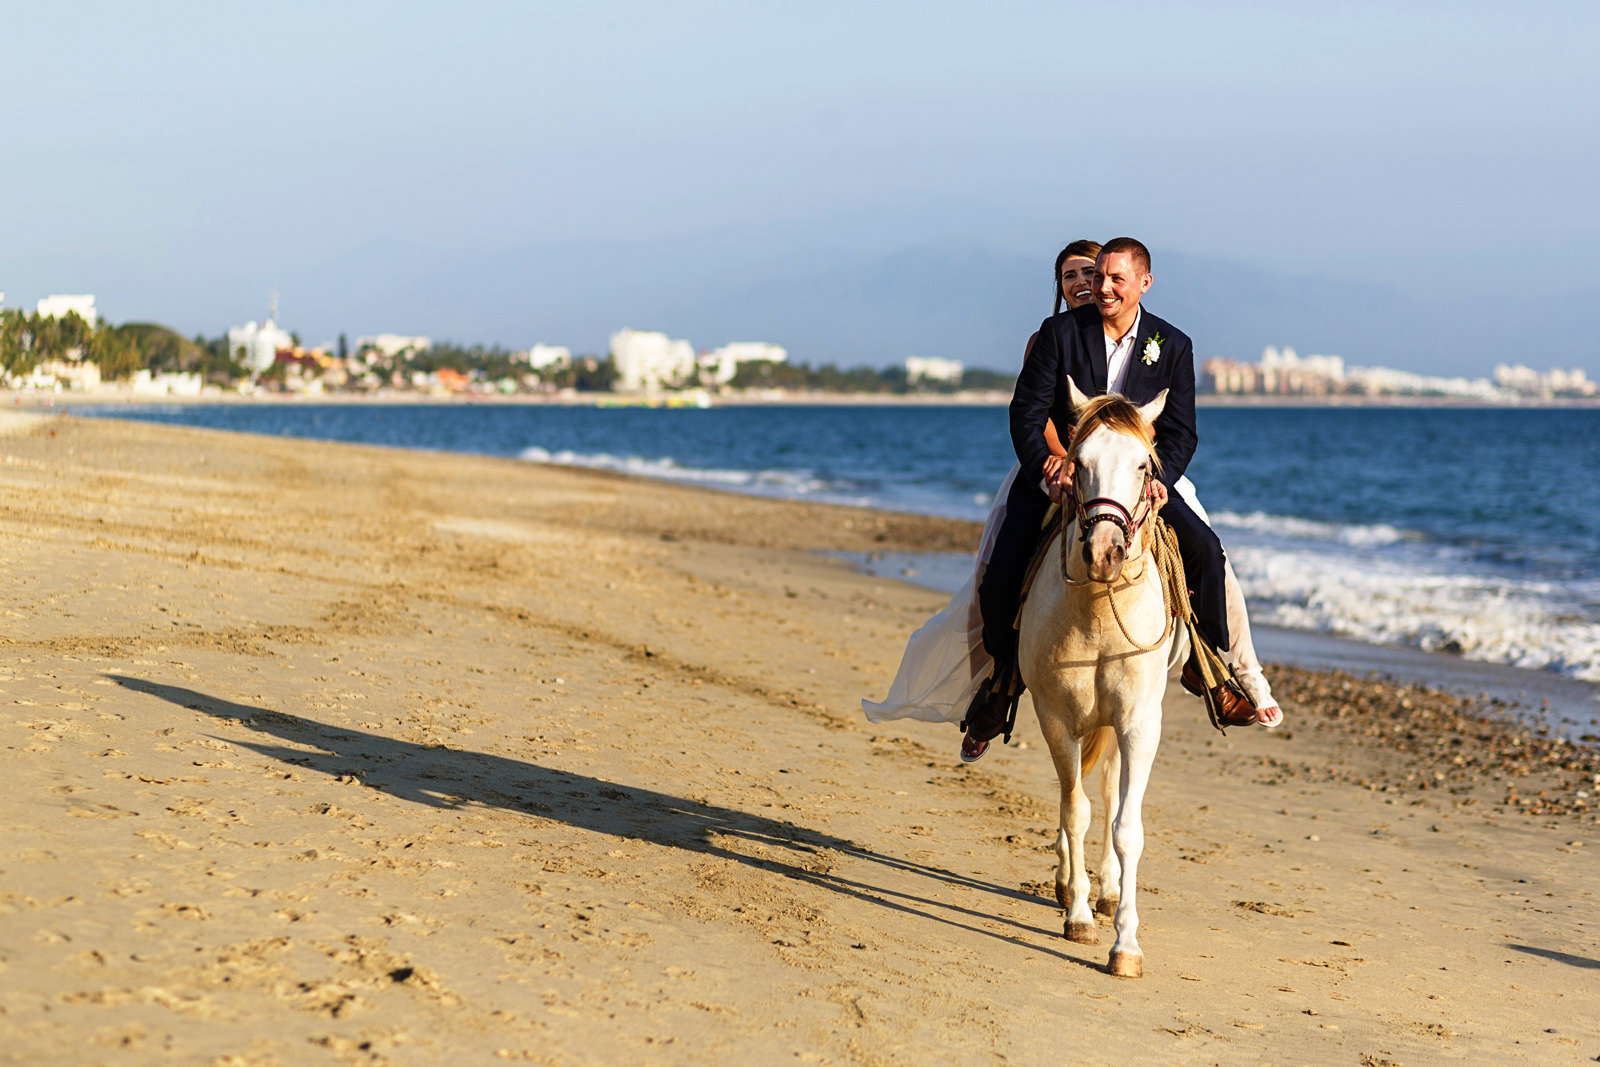 Bride and groom horse backridding on the beach